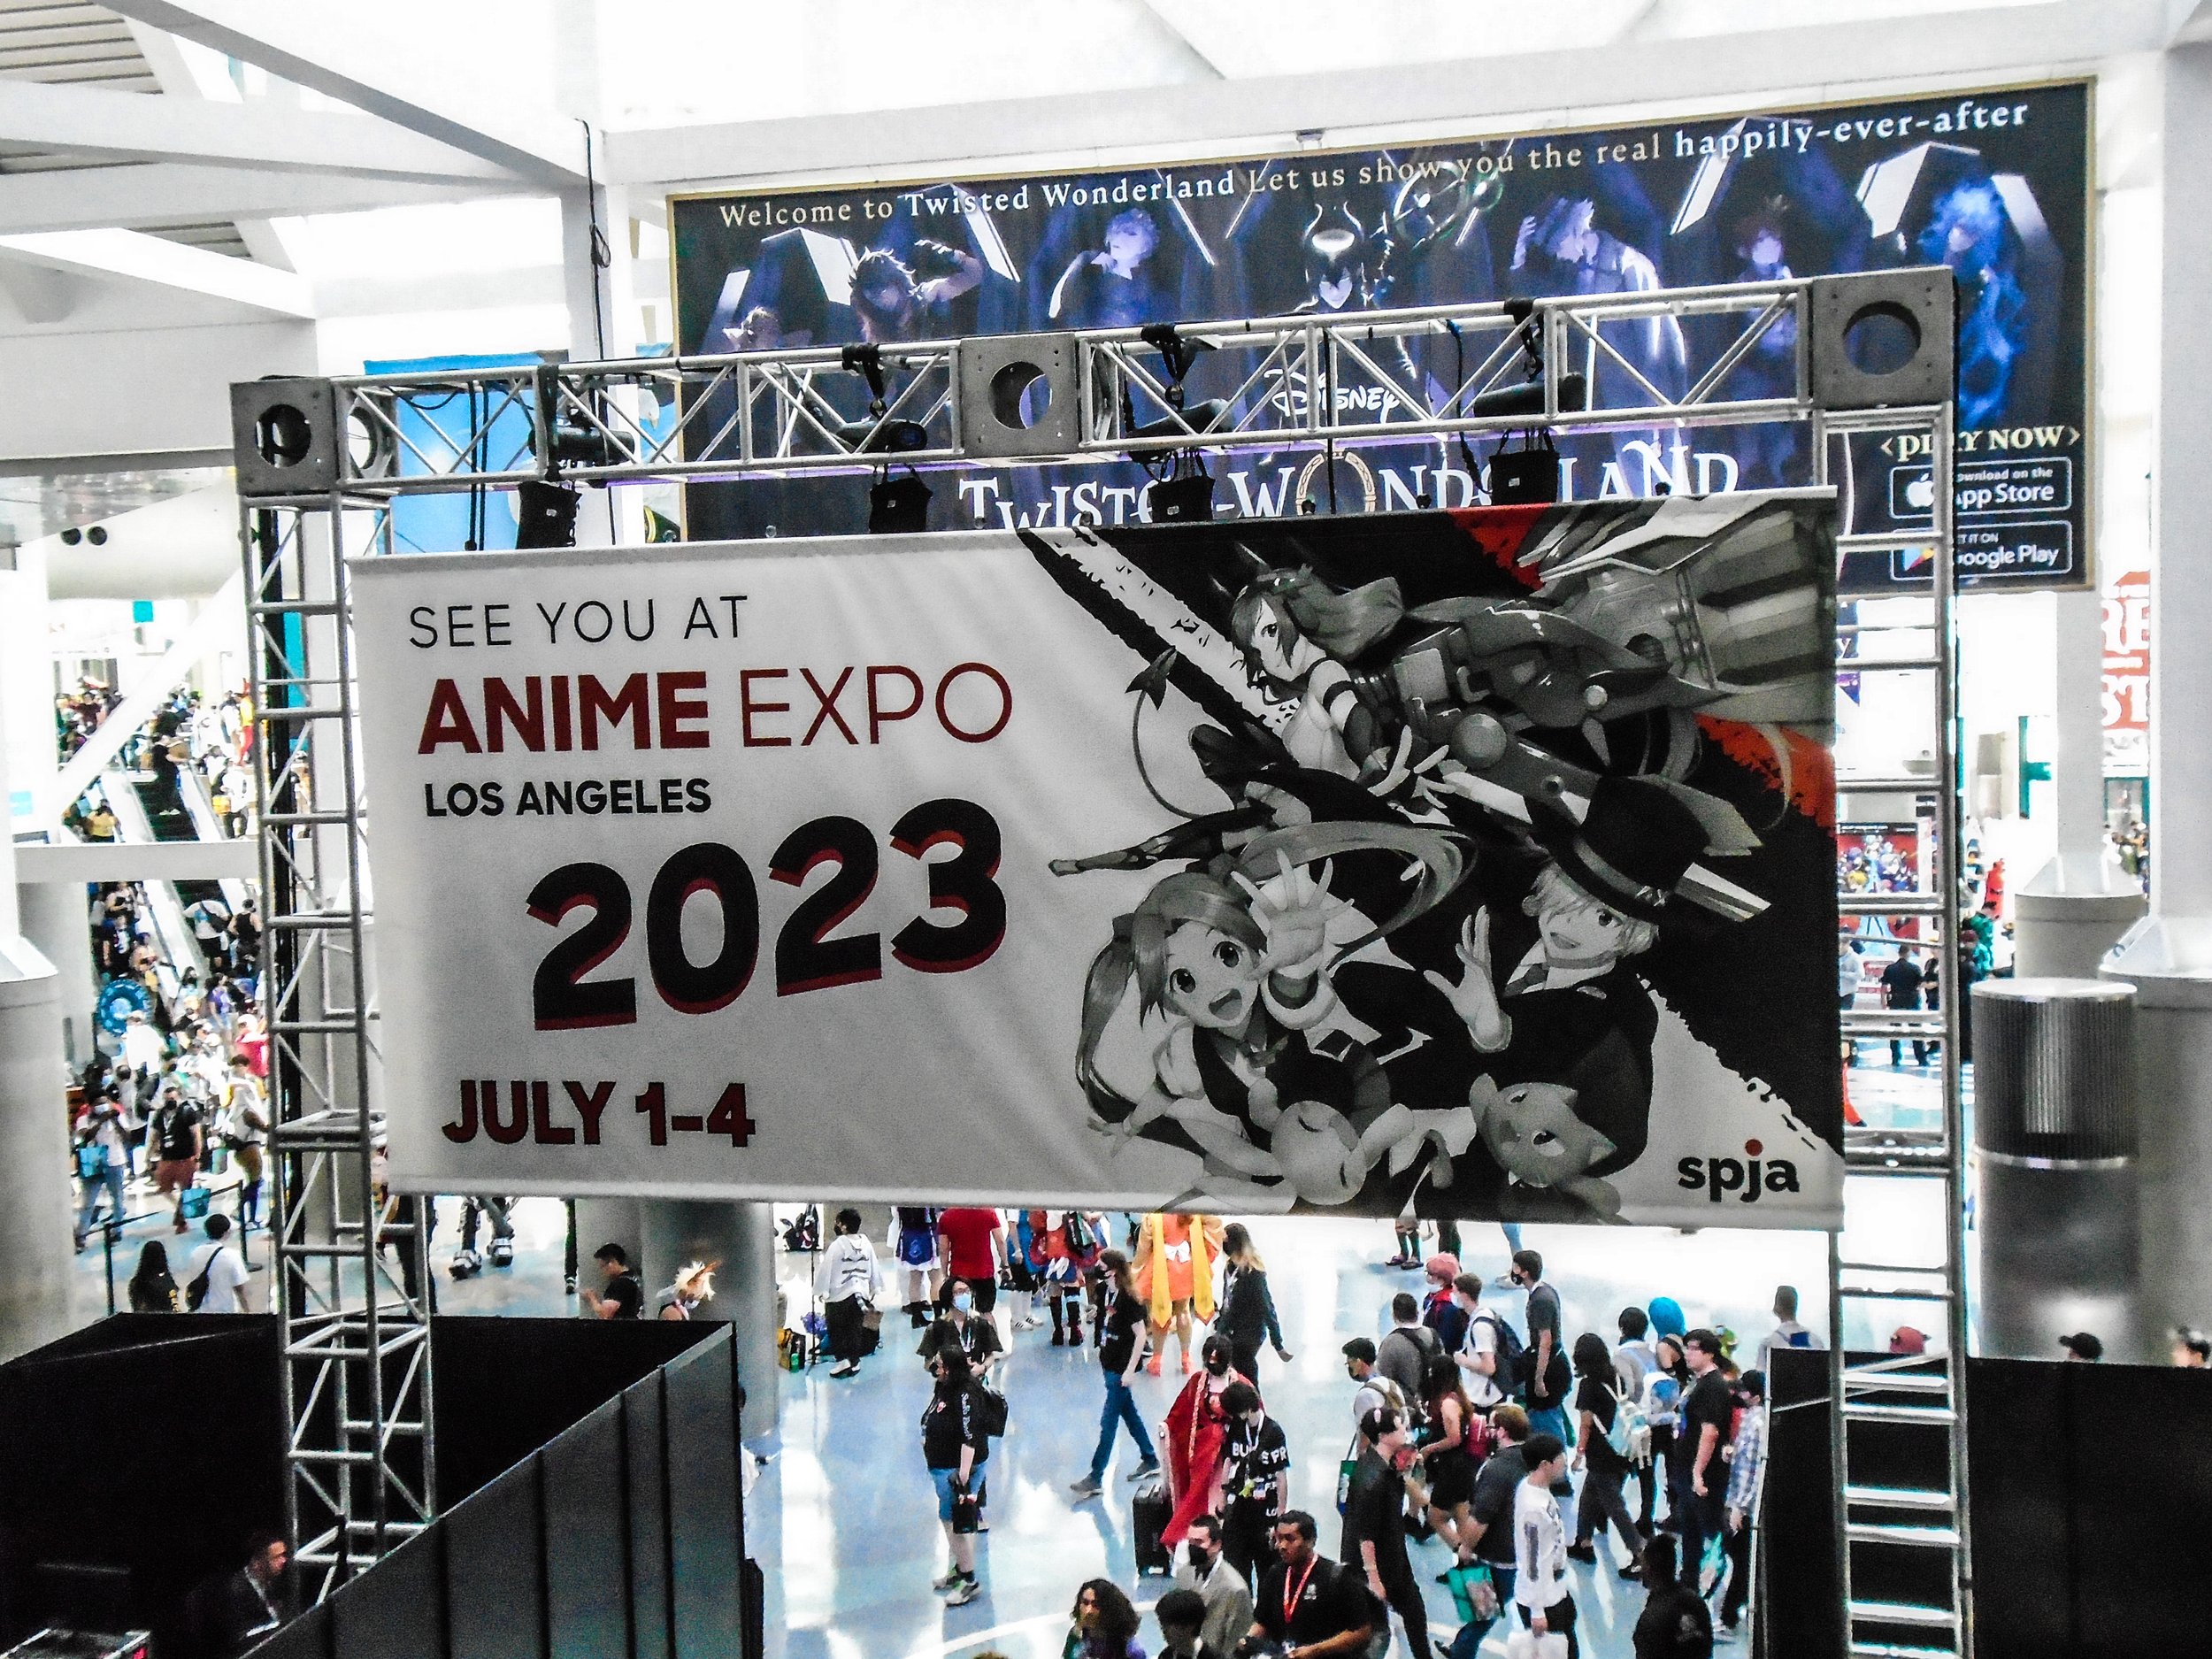 Genshin Impact  Anime Expo Notice of Attendance Genshin Impact will attend Anime  Expo 2022 Explore a world of adventure with us Travelers see you all in  Los Angeles Time July 1 